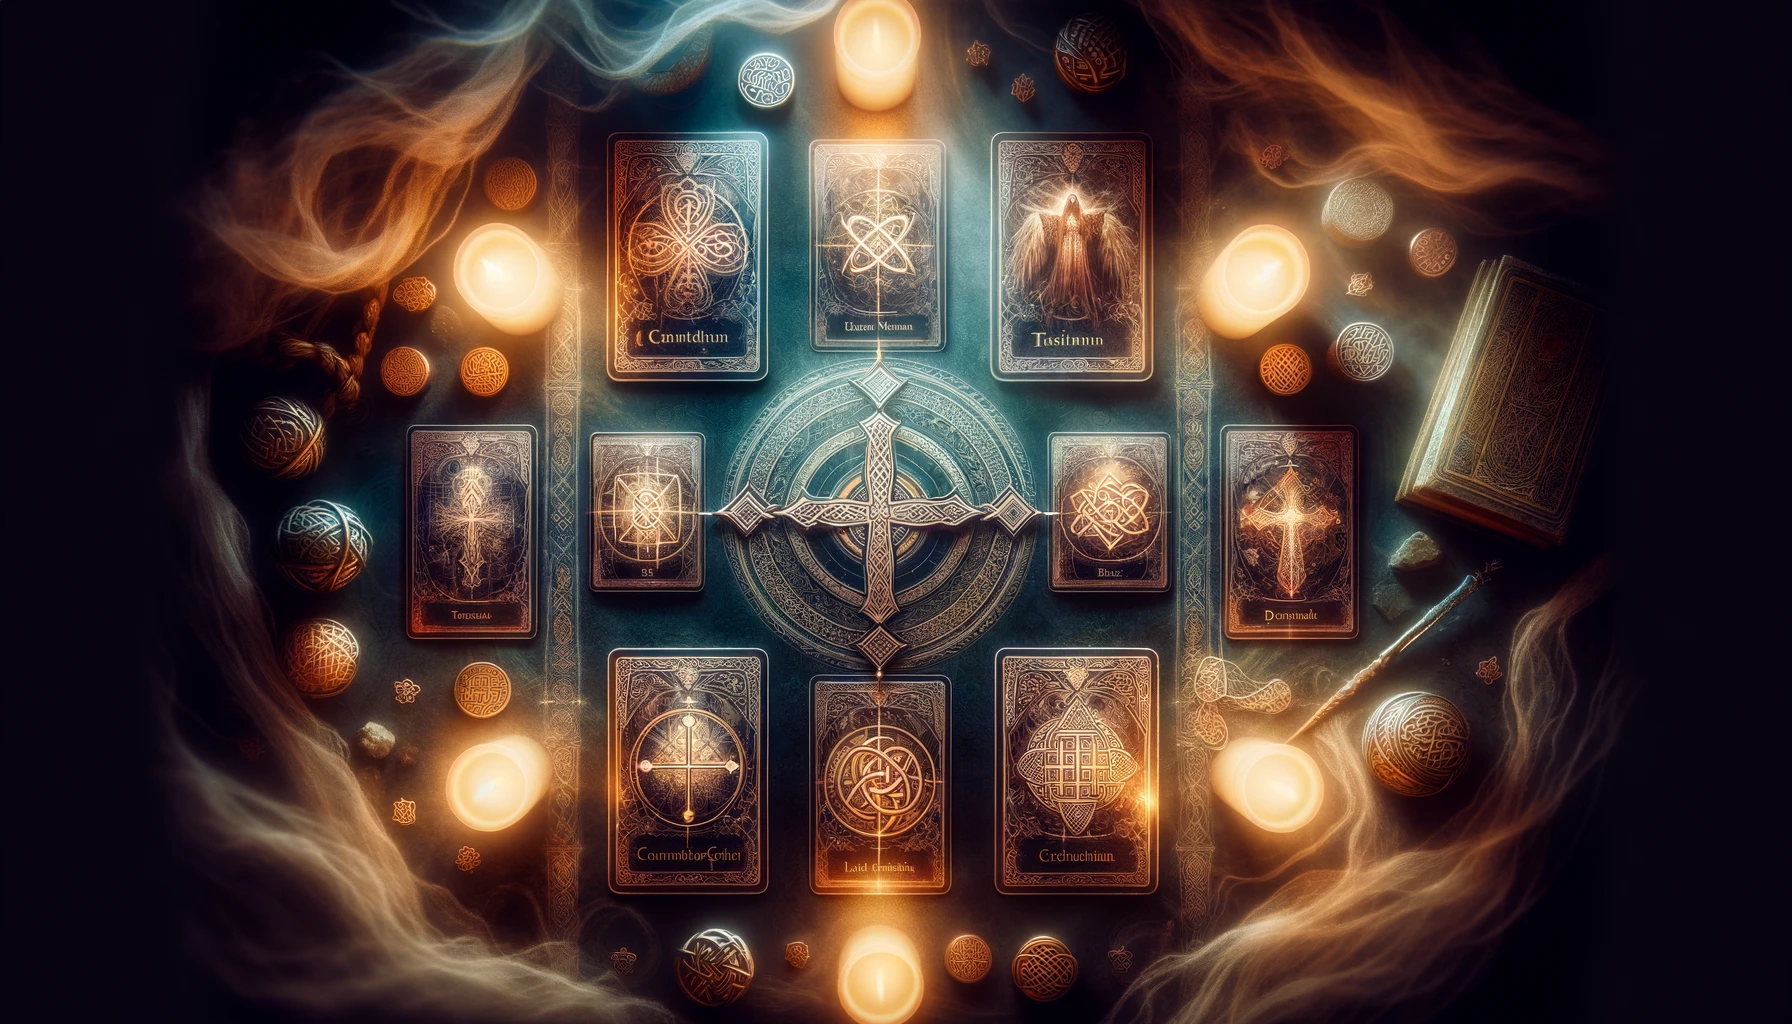 An image of an intricate Celtic Cross tarot spread highlighting the ten card positions with rich symbolism. The backdrop features ancient Celtic knot